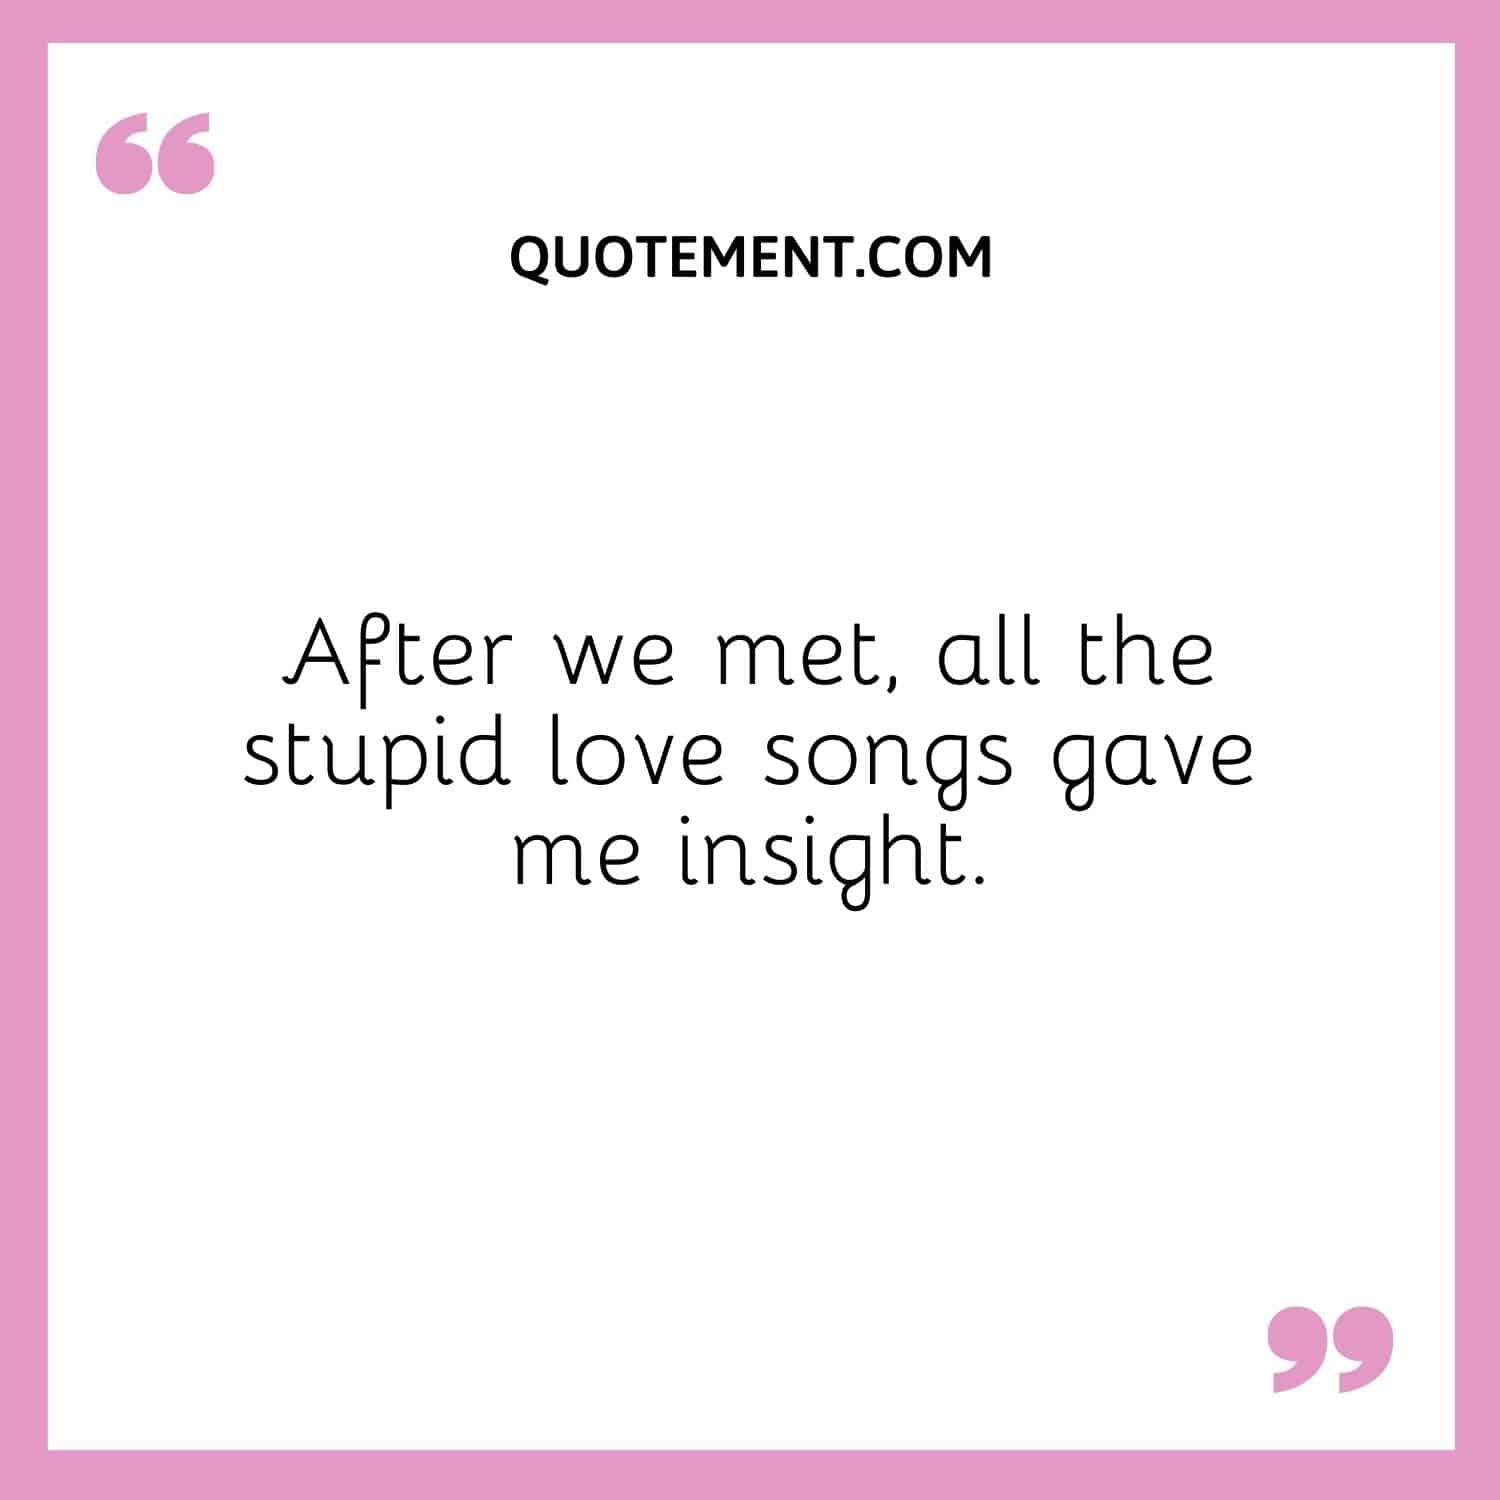 After we met, all the stupid love songs gave me insight.